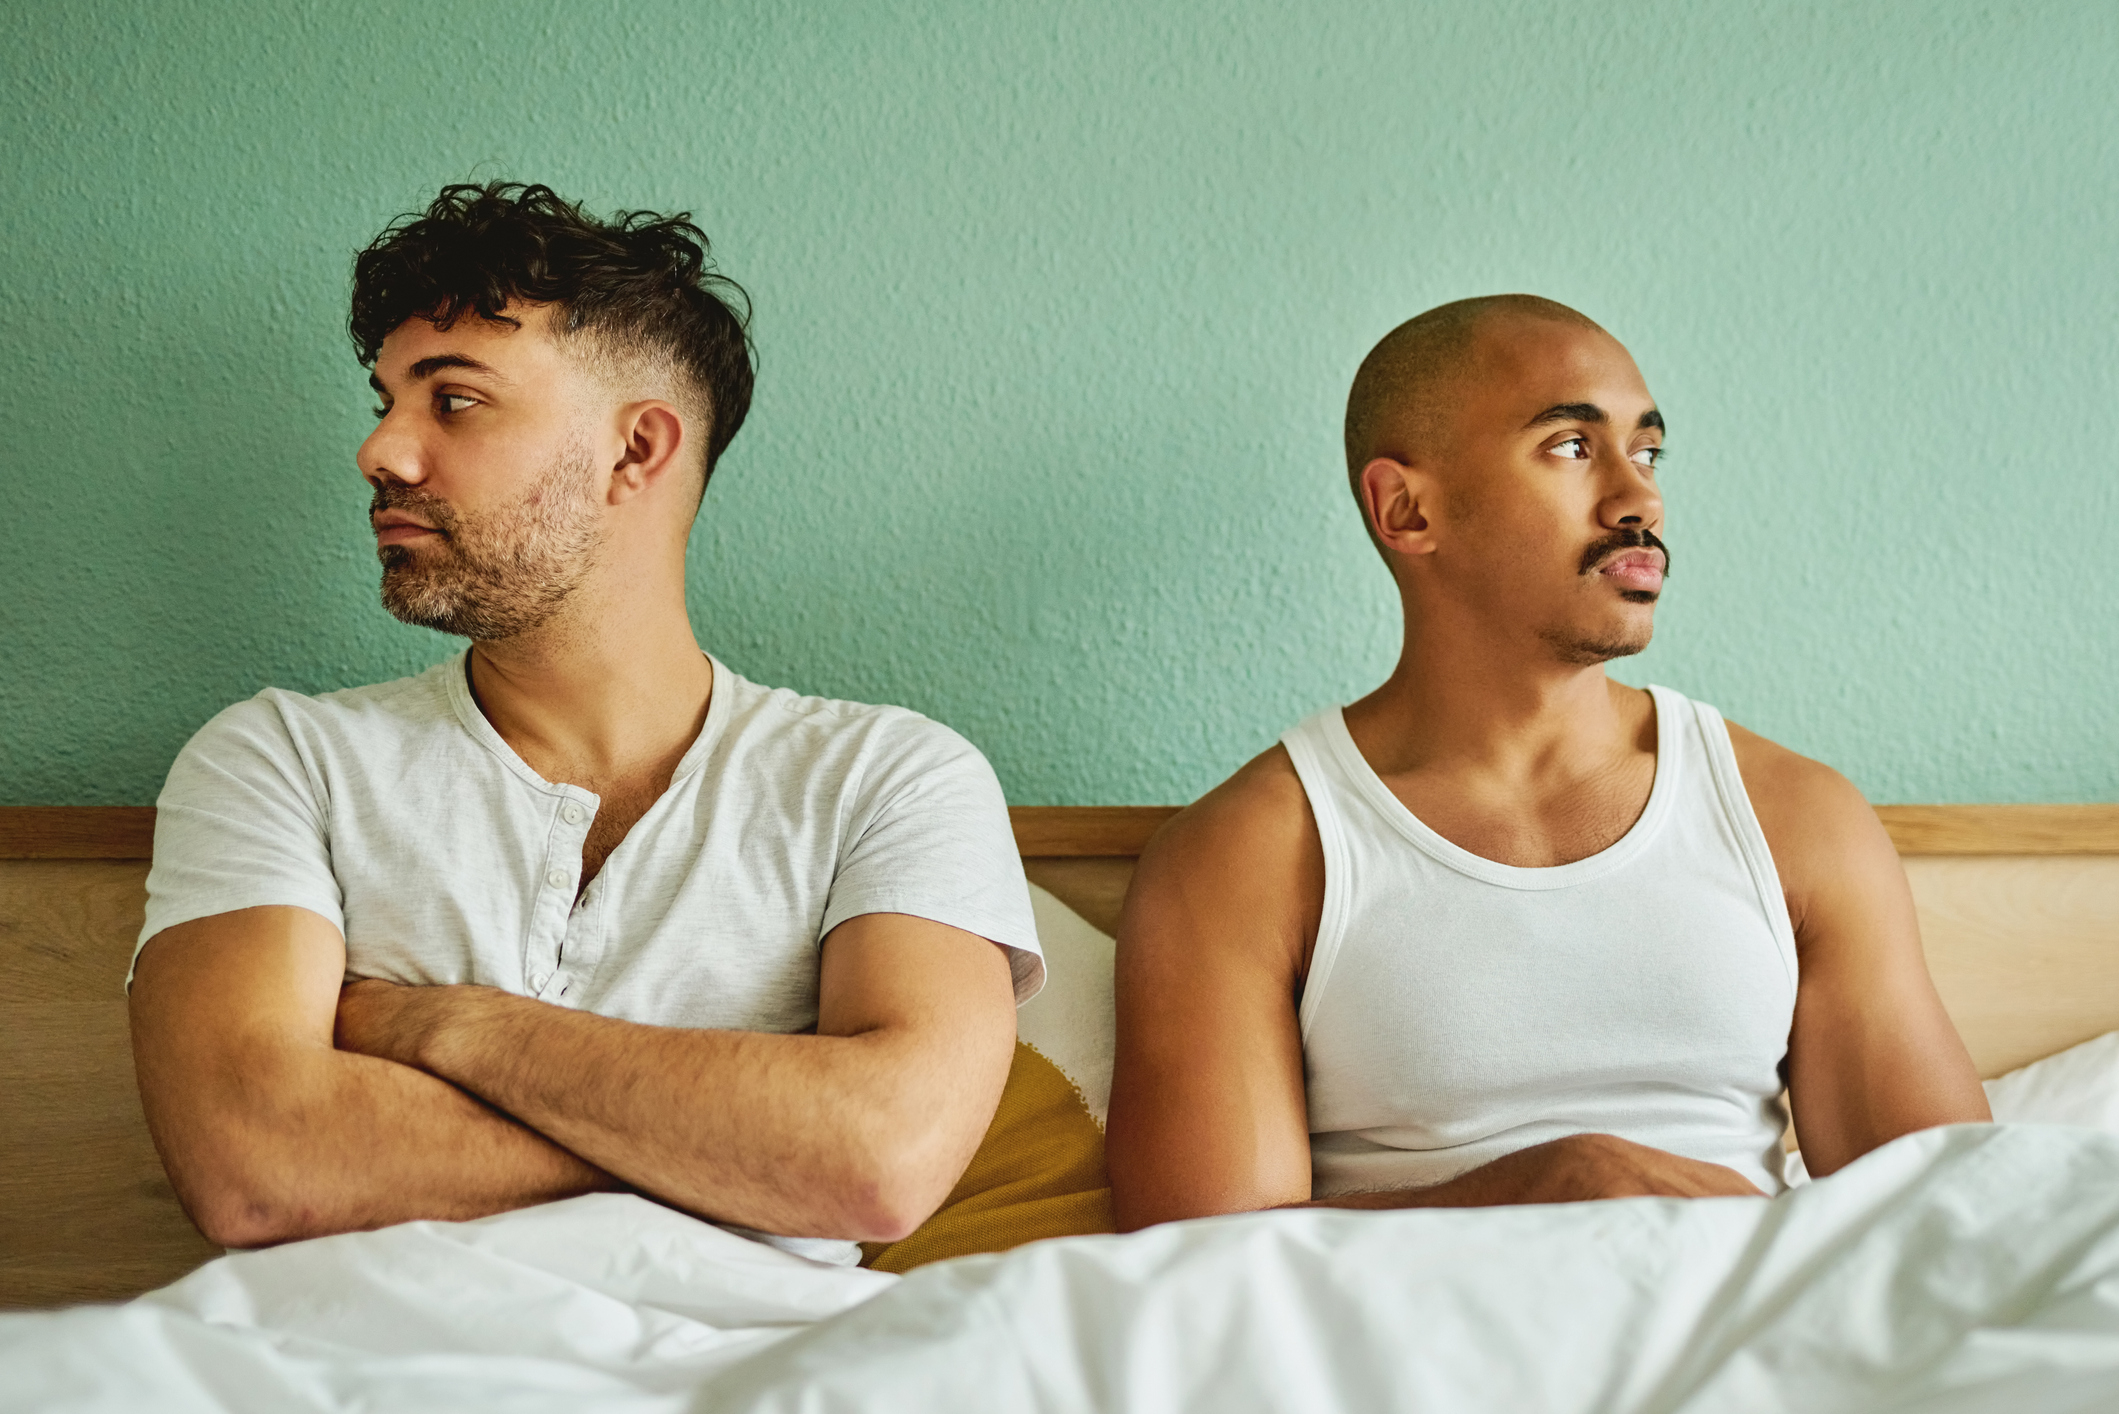 Two men sitting on a bed facing away from each other with expressions of concern or contemplation